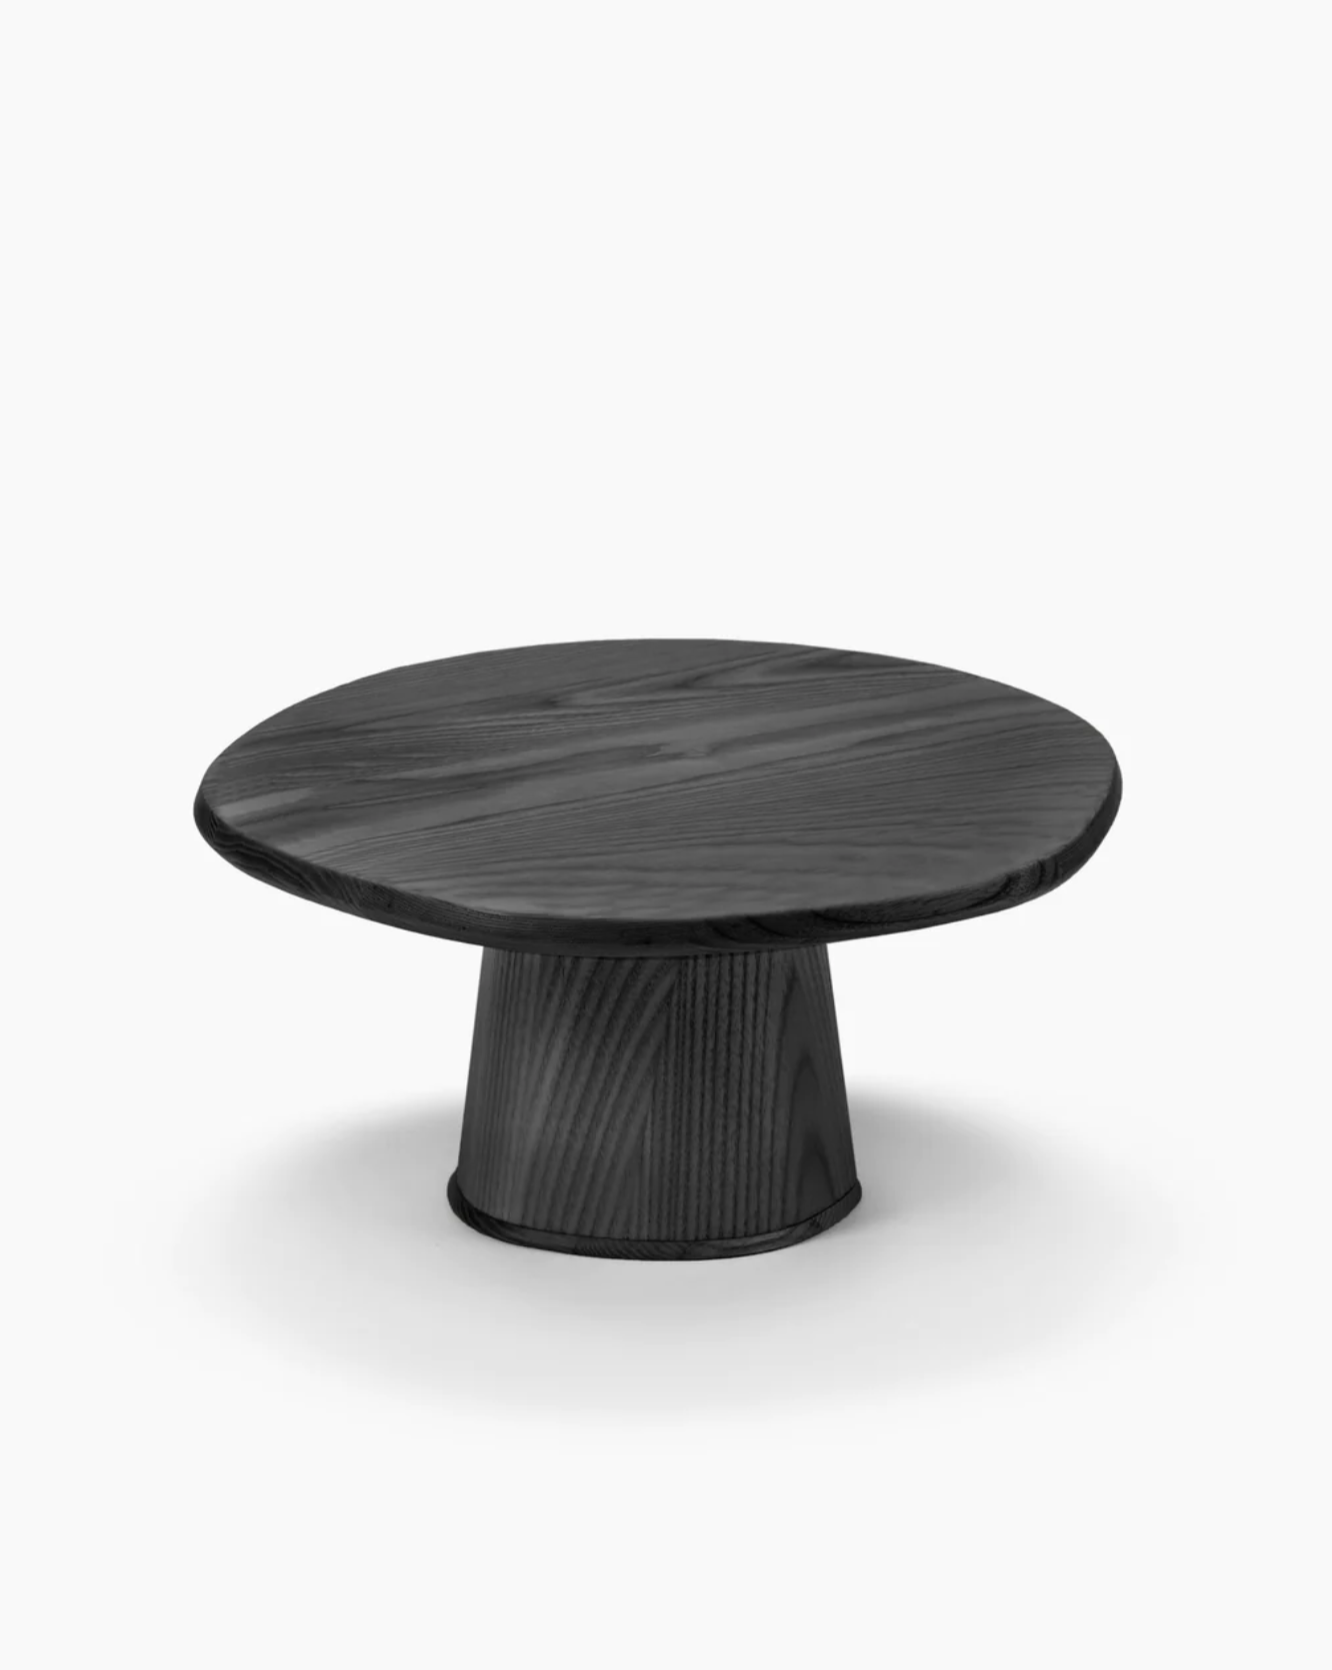 Cake stand by Kelly Wearstler